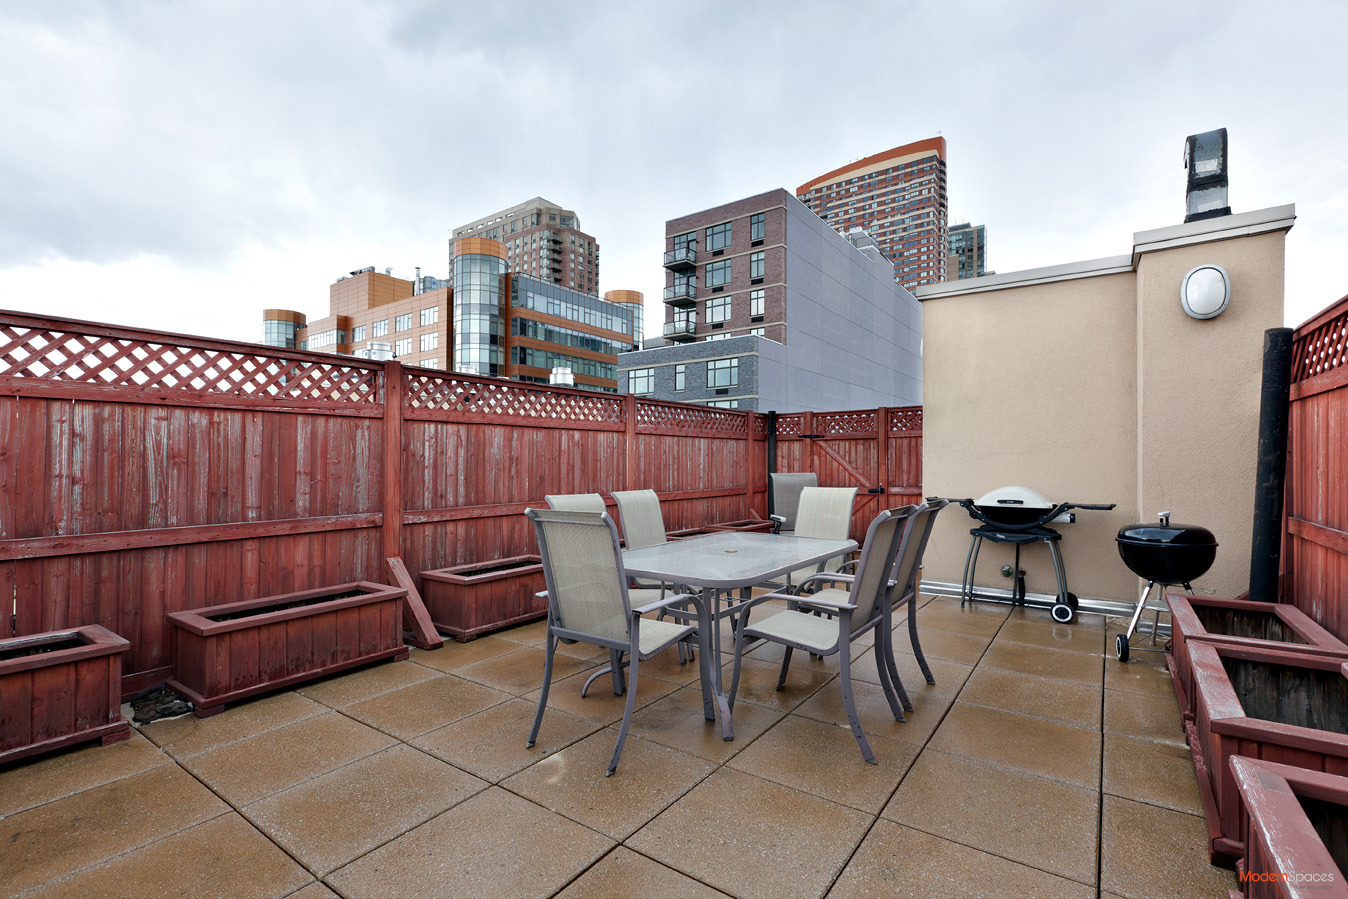 Island City Modern Long Island City Apartment Featured Modern Outdoor Dining Area And Freestanding Grill Plus Beautiful Wooden Fence Also Water Feature Decor Idea Apartment Compact Long Island City Apartment Interior Design In Open Plan Layout